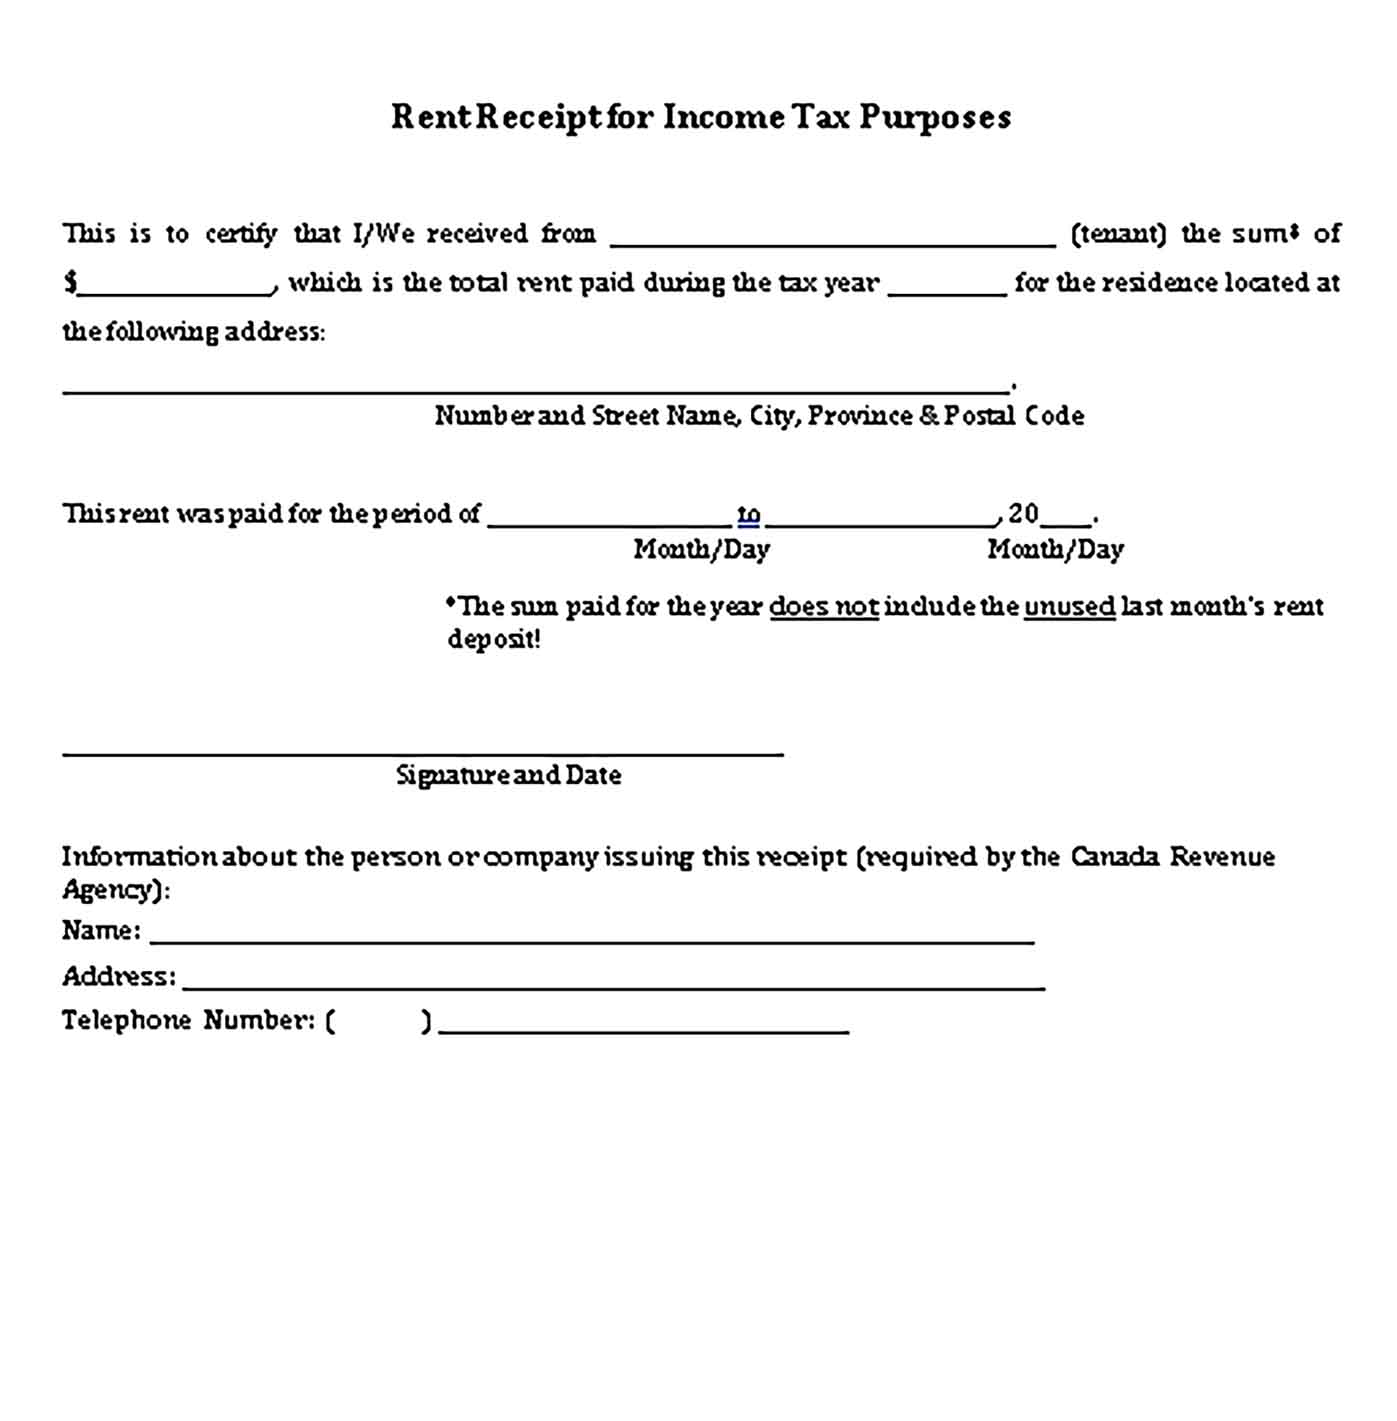 Sample Rent Receipt for Income Tax Purposes Templates